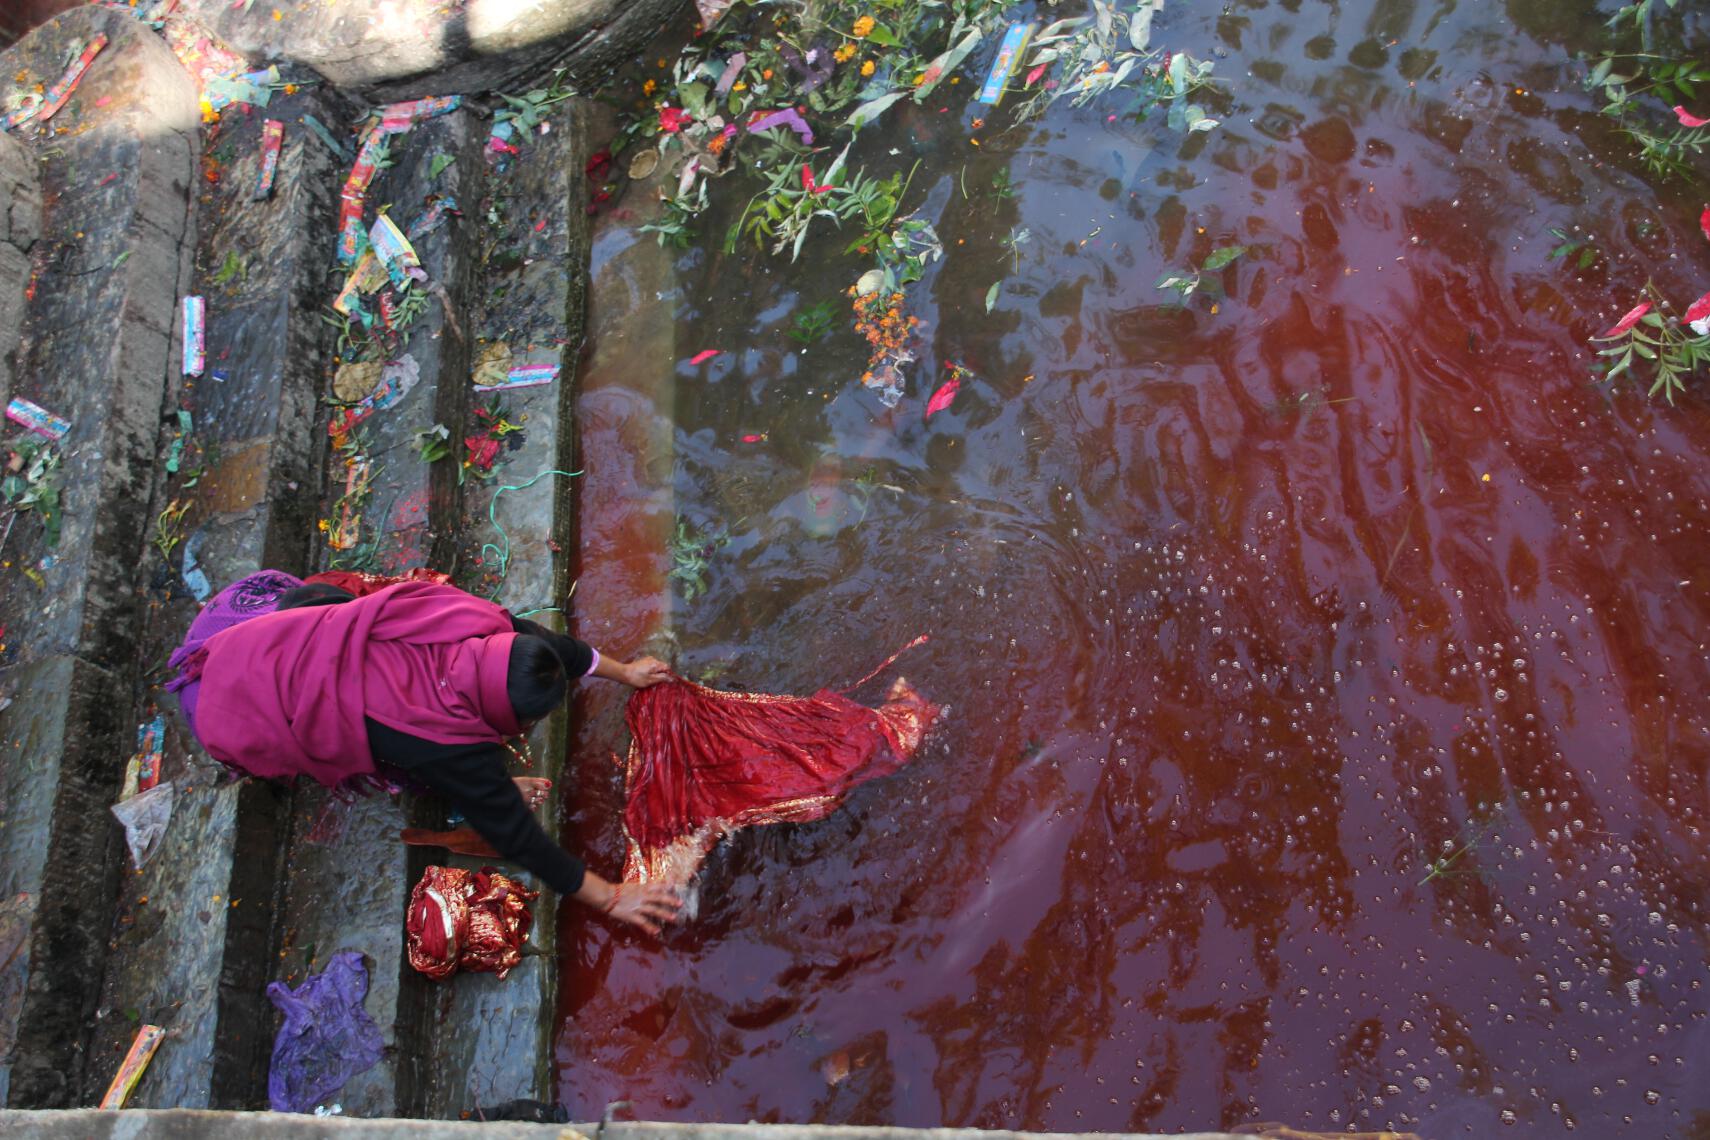 A woman soaks clothing in a blood-filled stream adjacent to the temple of Kali, Shiva's bloodthirsty consort.